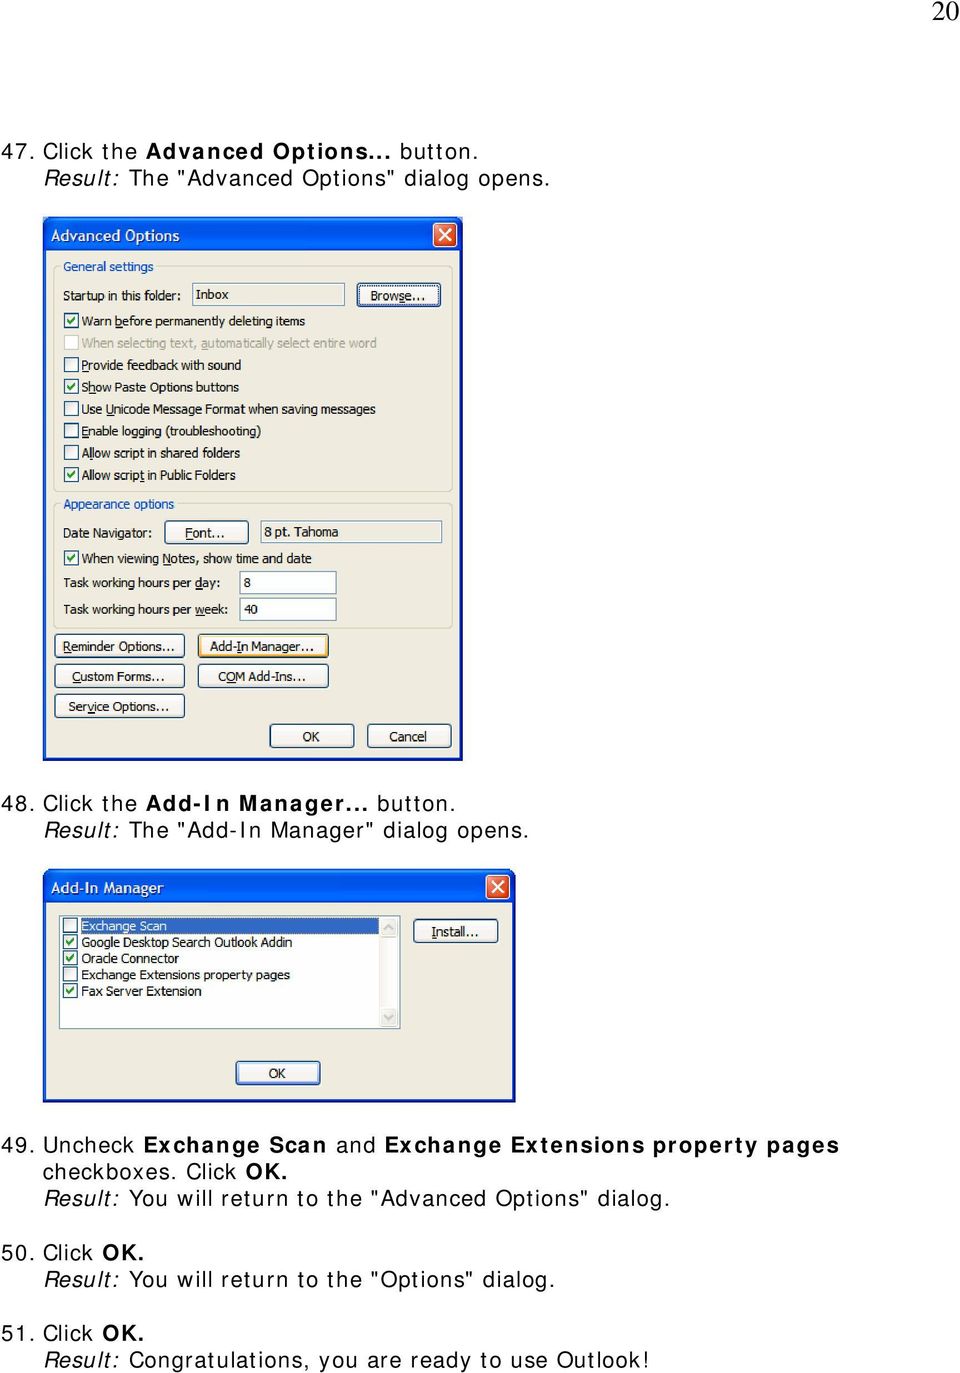 Uncheck Exchange Scan and Exchange Extensions property pages checkboxes. Click OK.